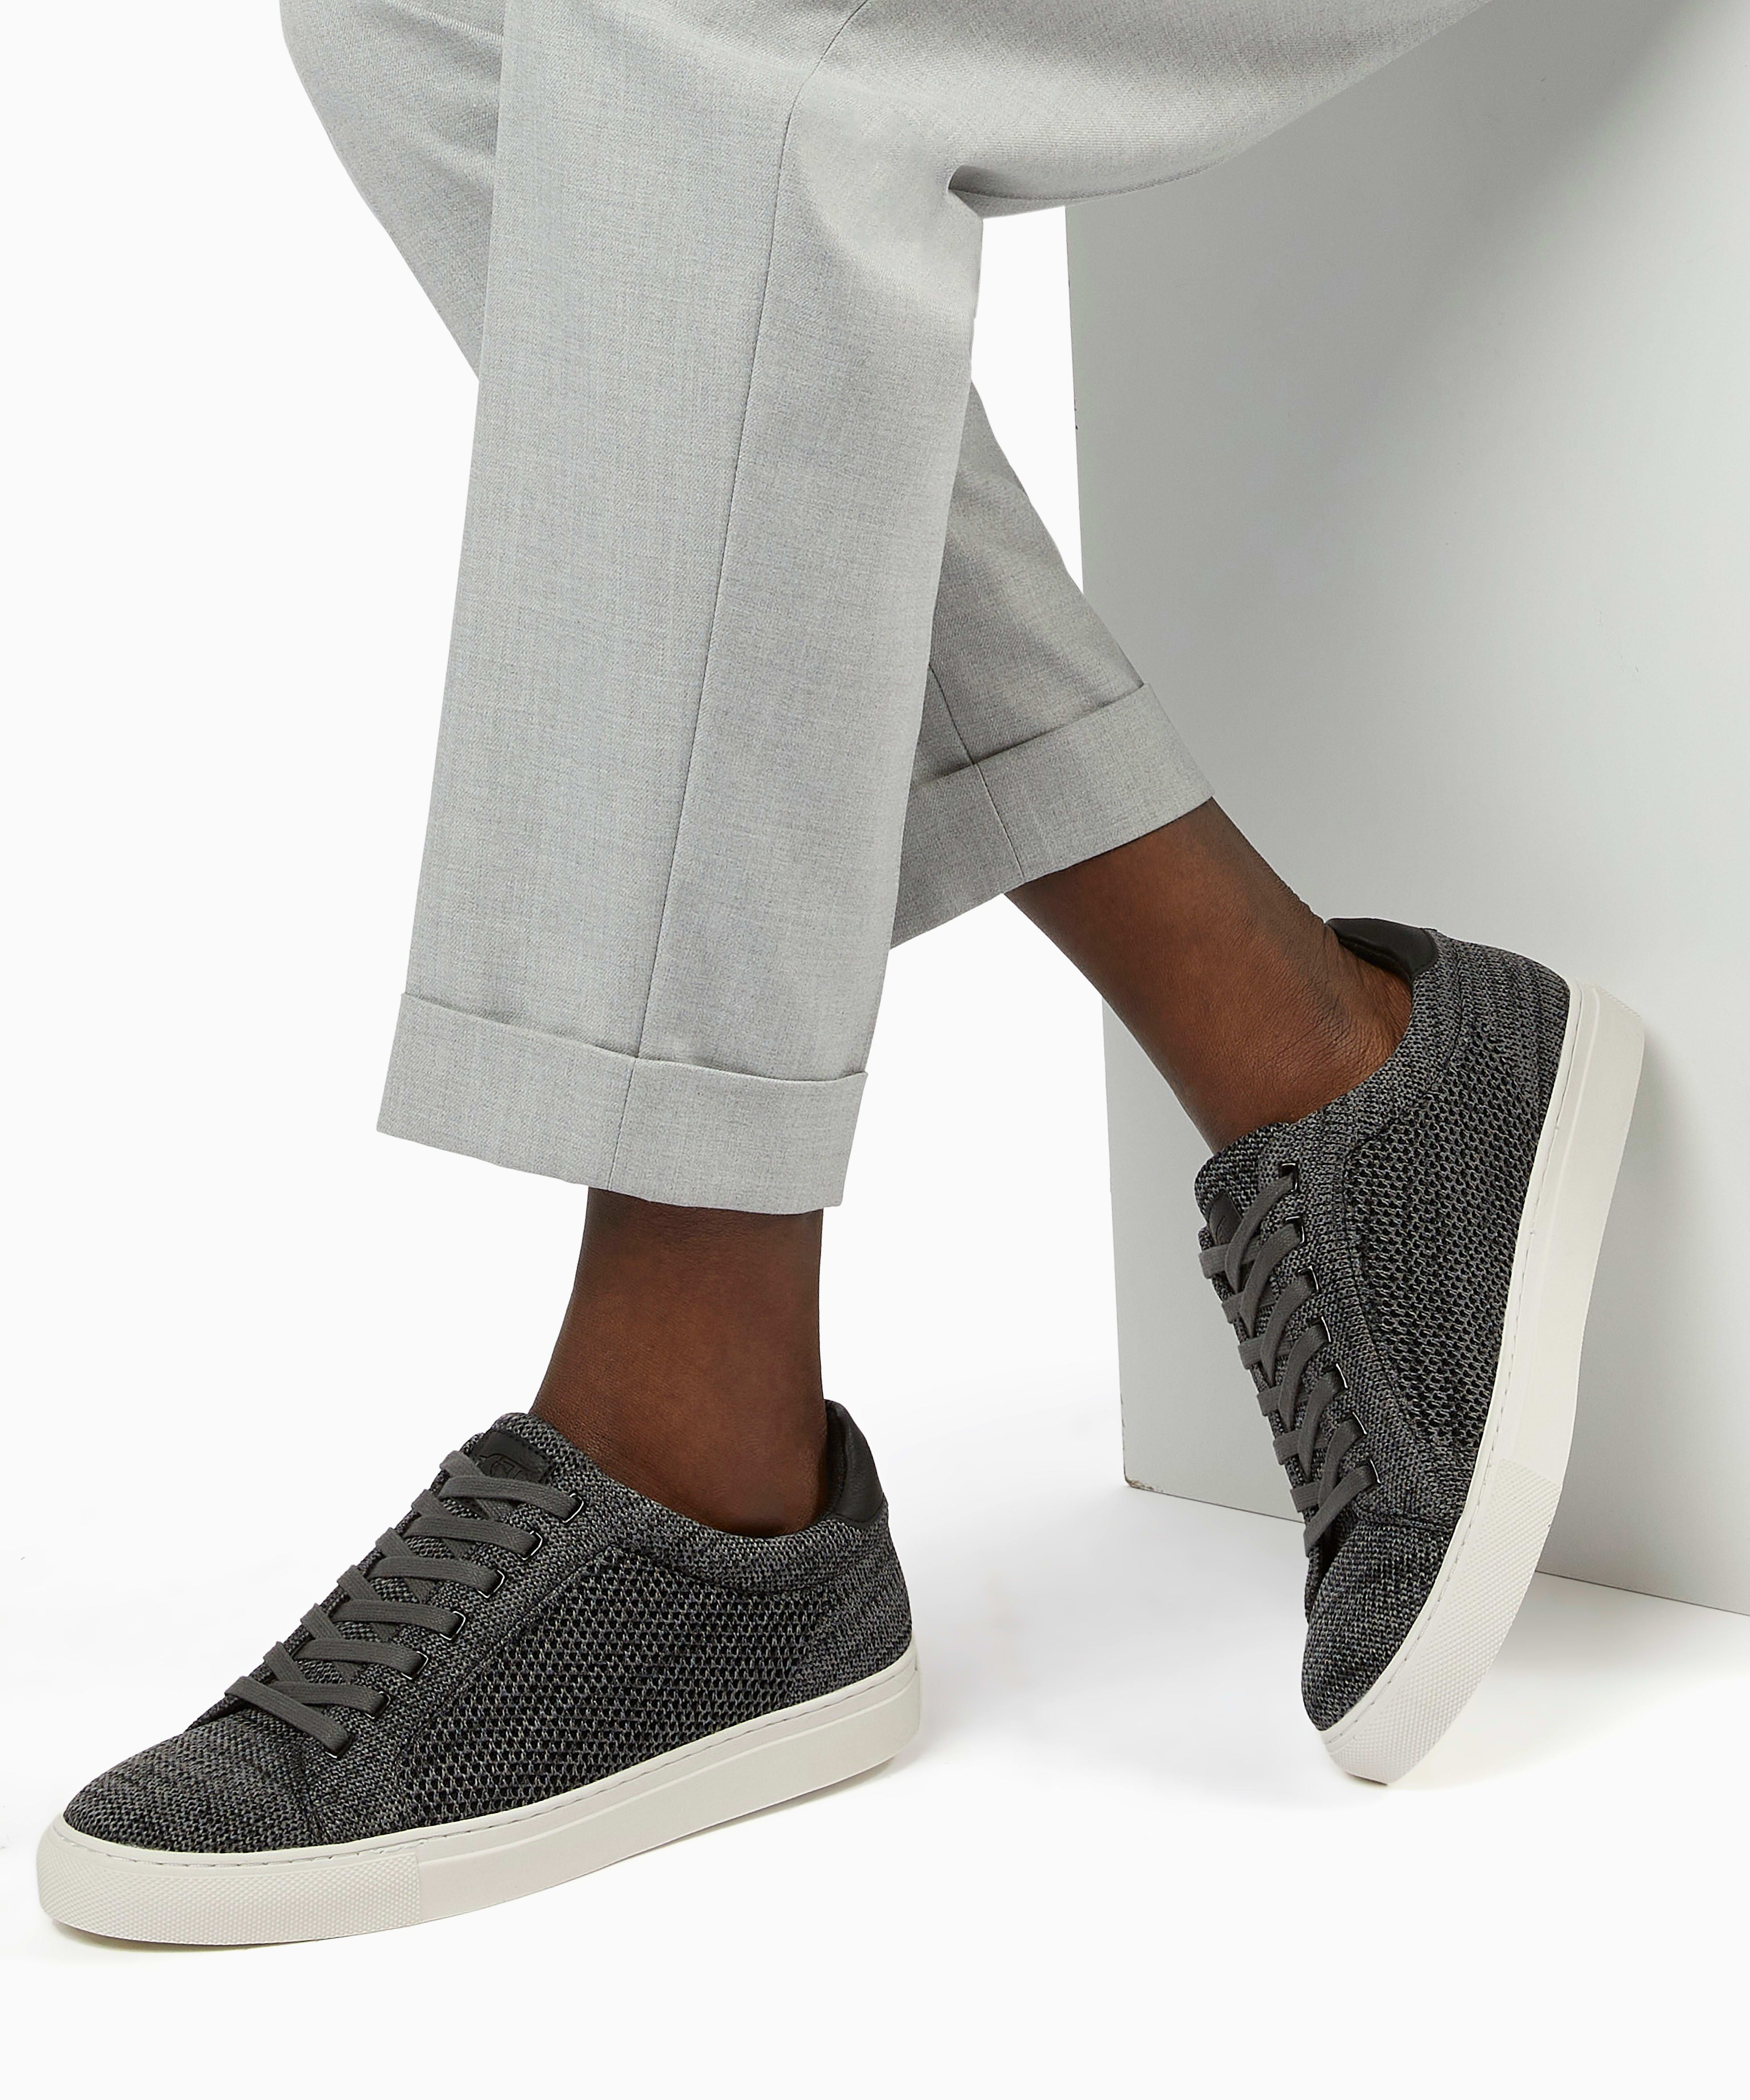 With a trend-led knitted upper and a retro-sneaker silhouette, these trainers are perfect for the summer months. This modern style is wonderfully comfortable and ideal for everyday wear.